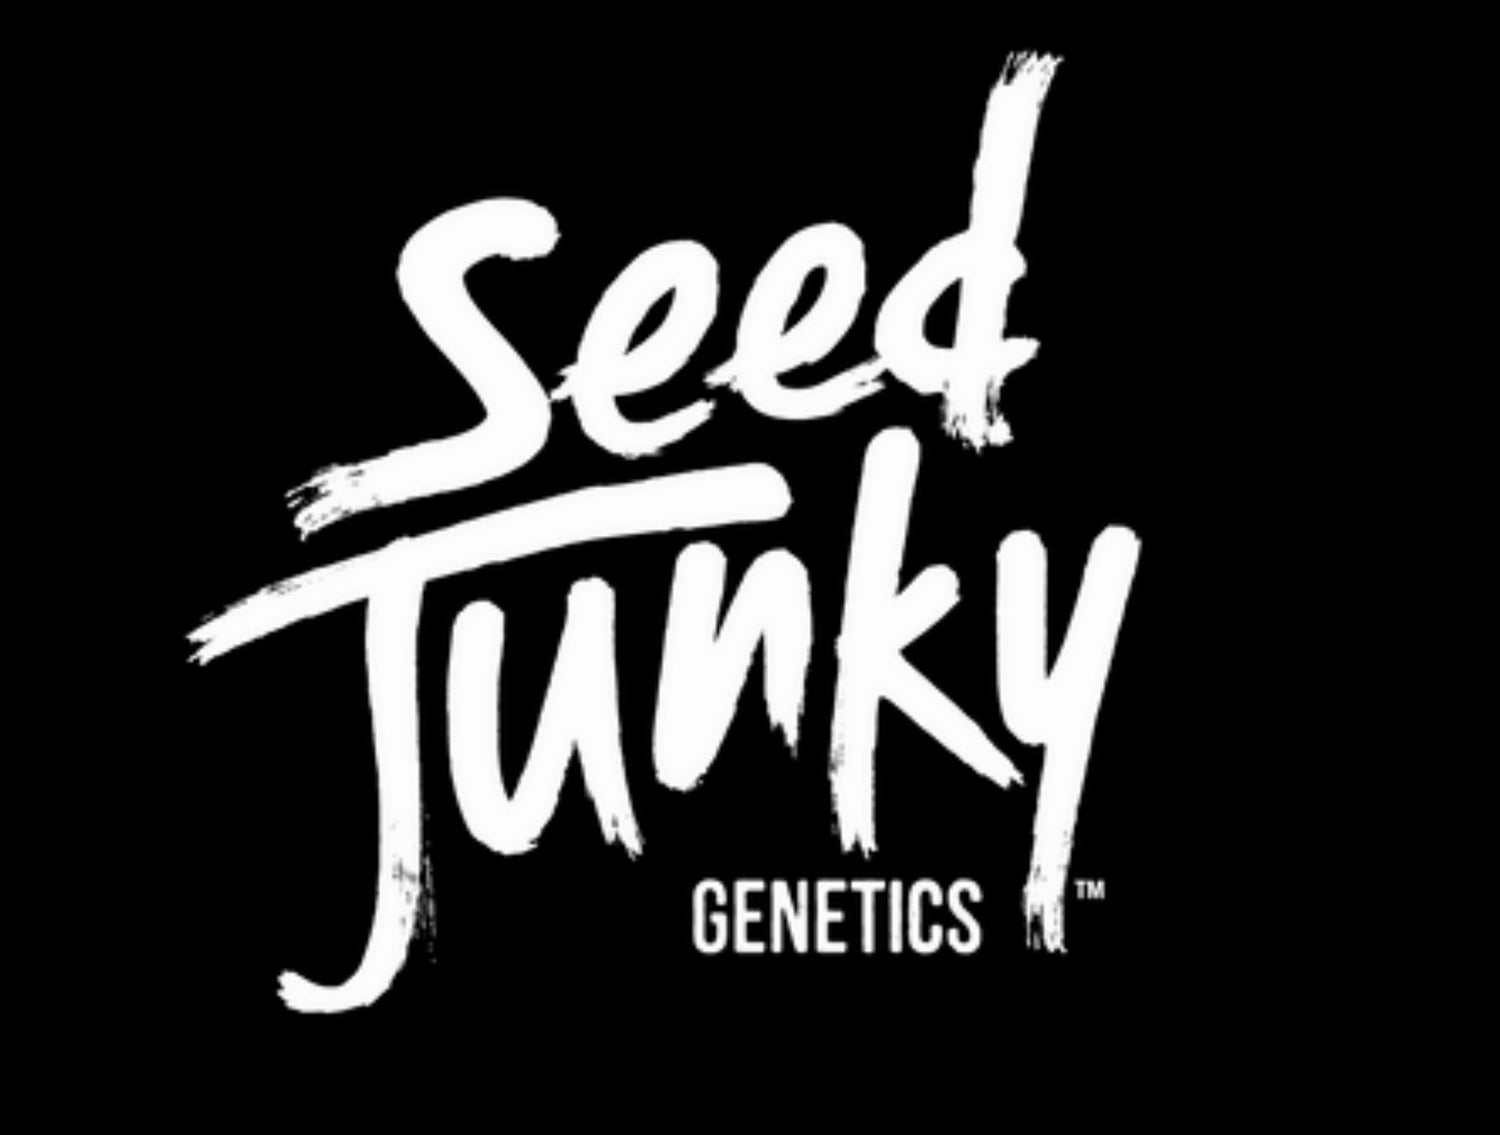 SEED JUNKY